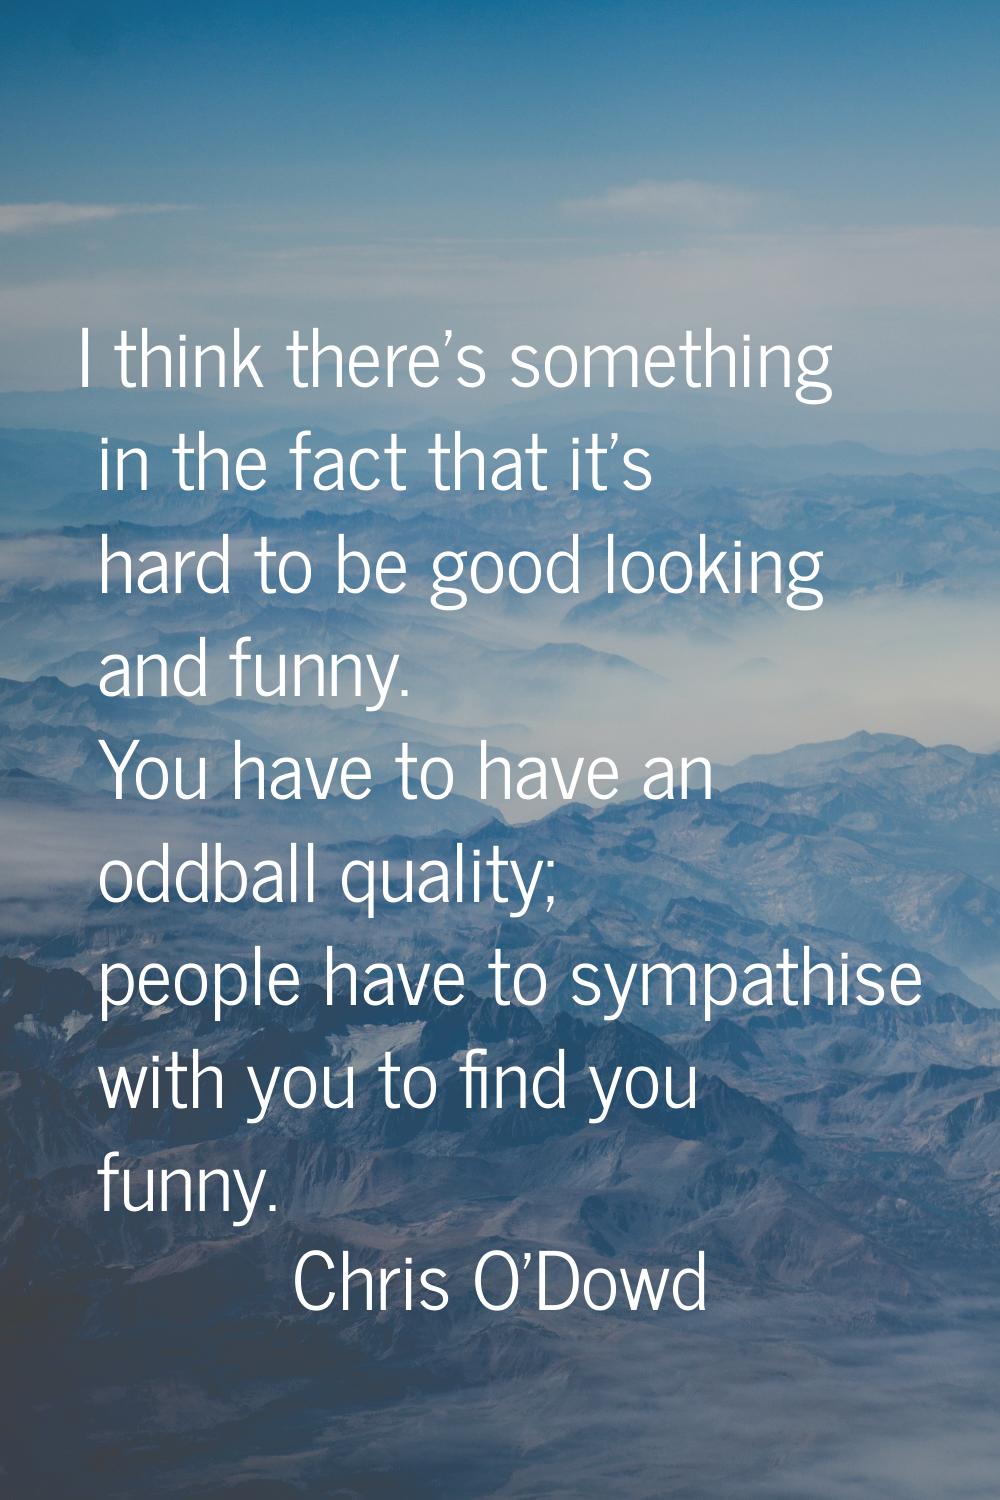 I think there's something in the fact that it's hard to be good looking and funny. You have to have